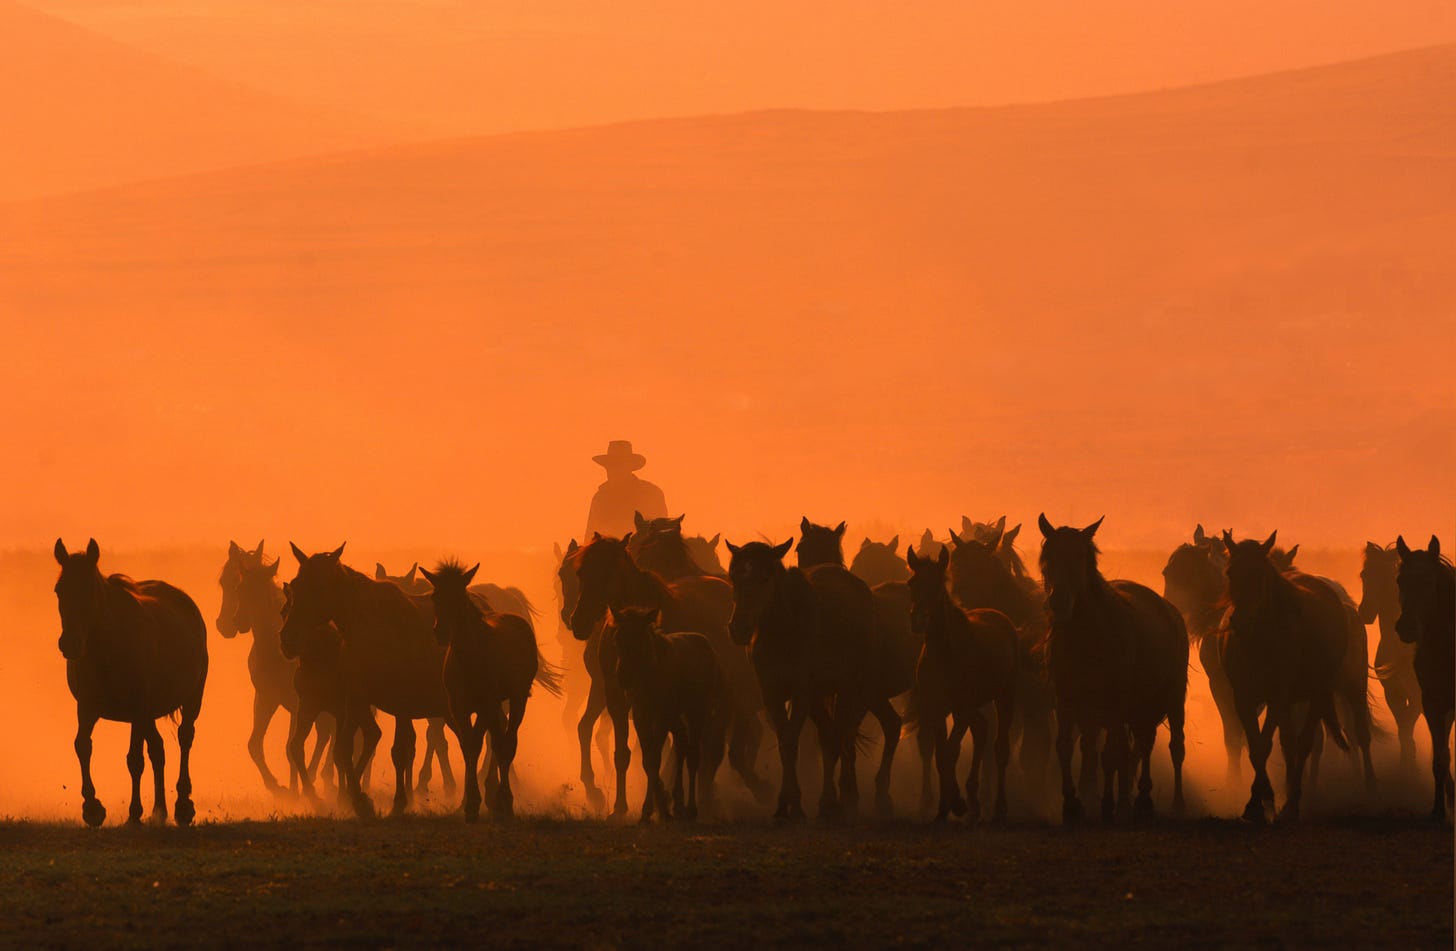 A cowboy riding in a herd of horses.